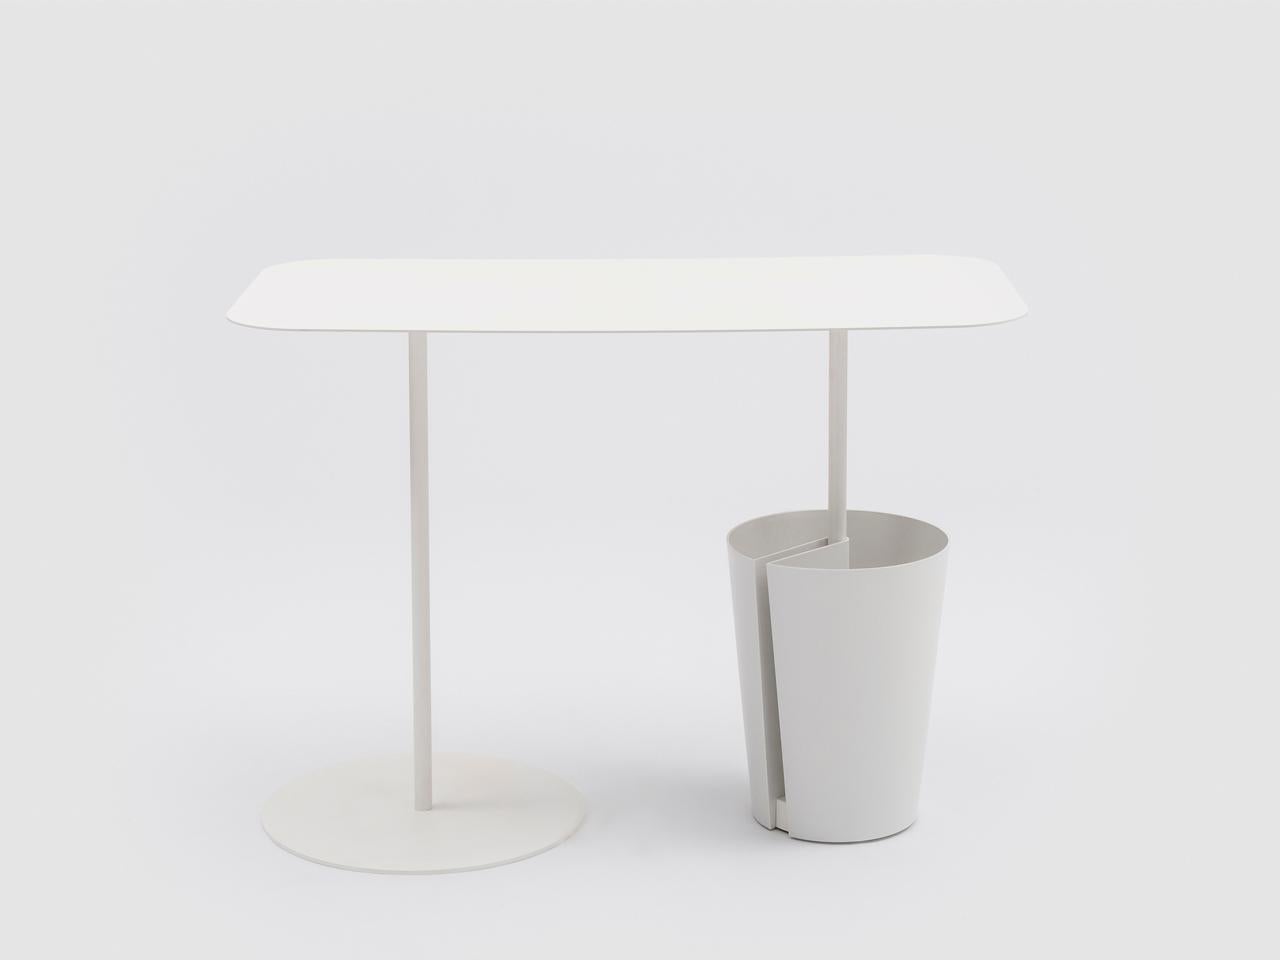 Bincan desk is part of the Bincan collection, which was designed for the work place and can be adapted to any type of office or work space. The minimal structure in powder-coated metal can be integrated with the Itka led lamp with USB socket and